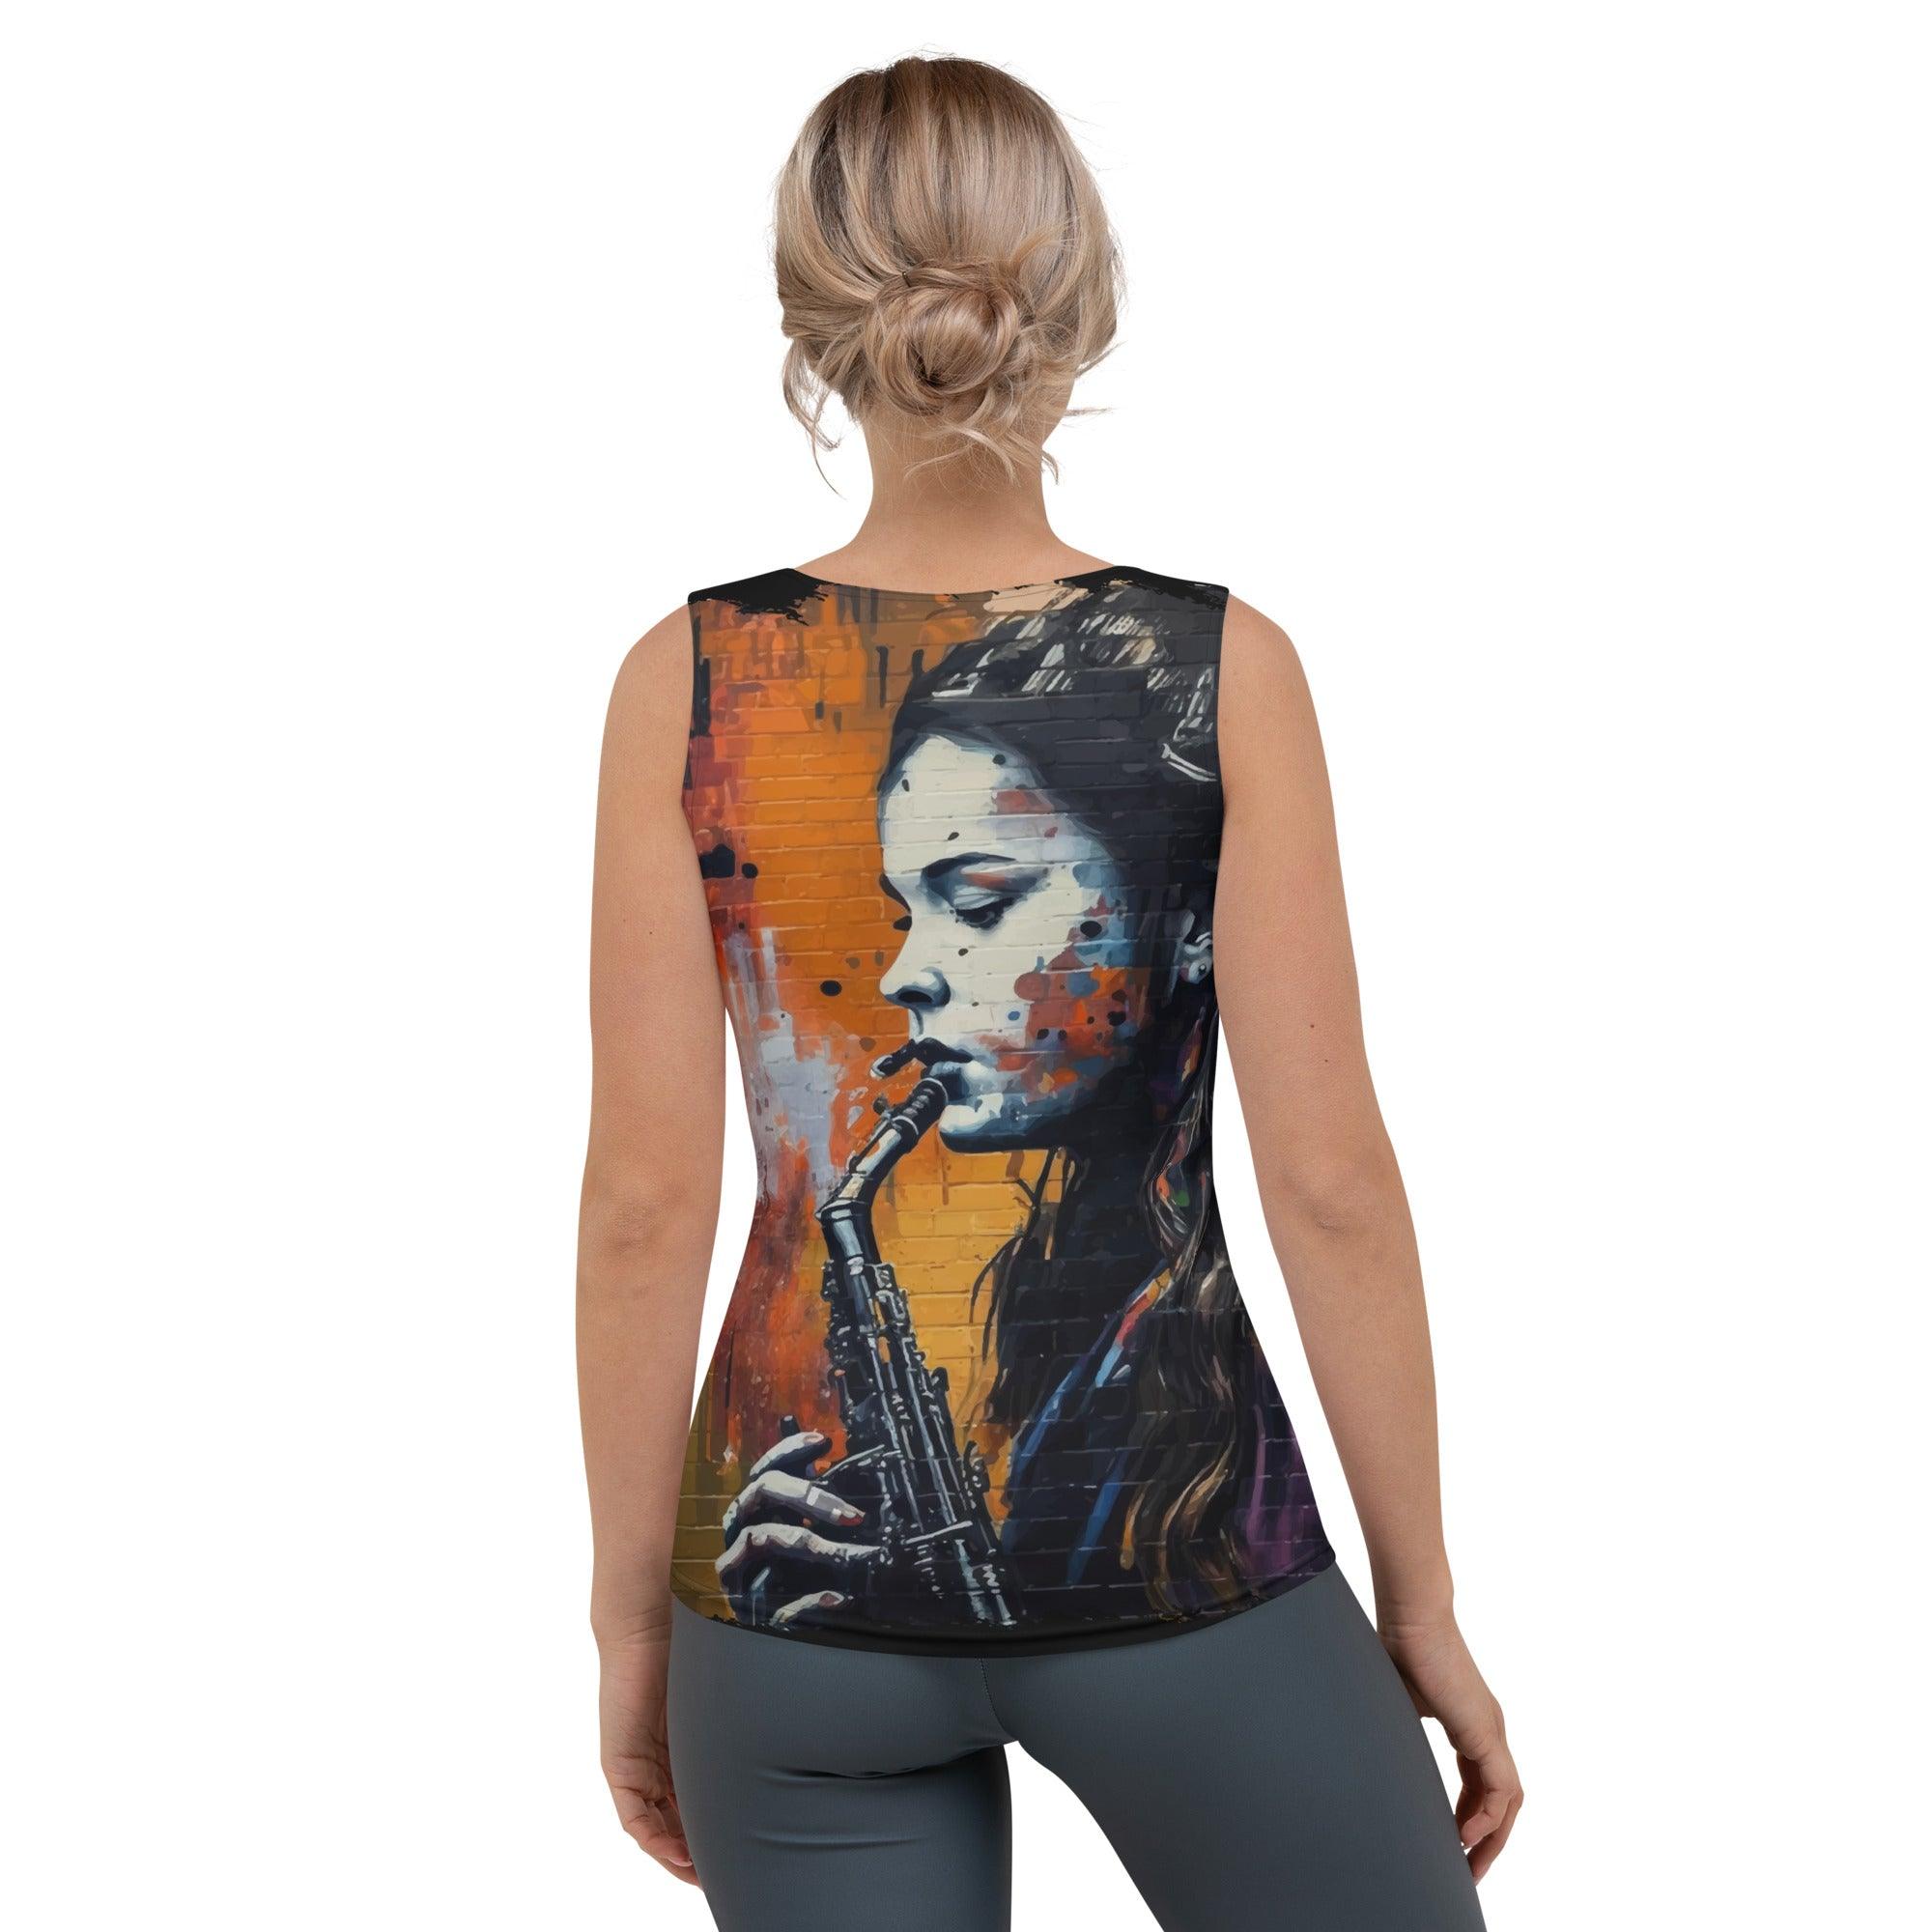 Notes Flow Like Honey Sublimation Cut & Sew Tank Top - Beyond T-shirts